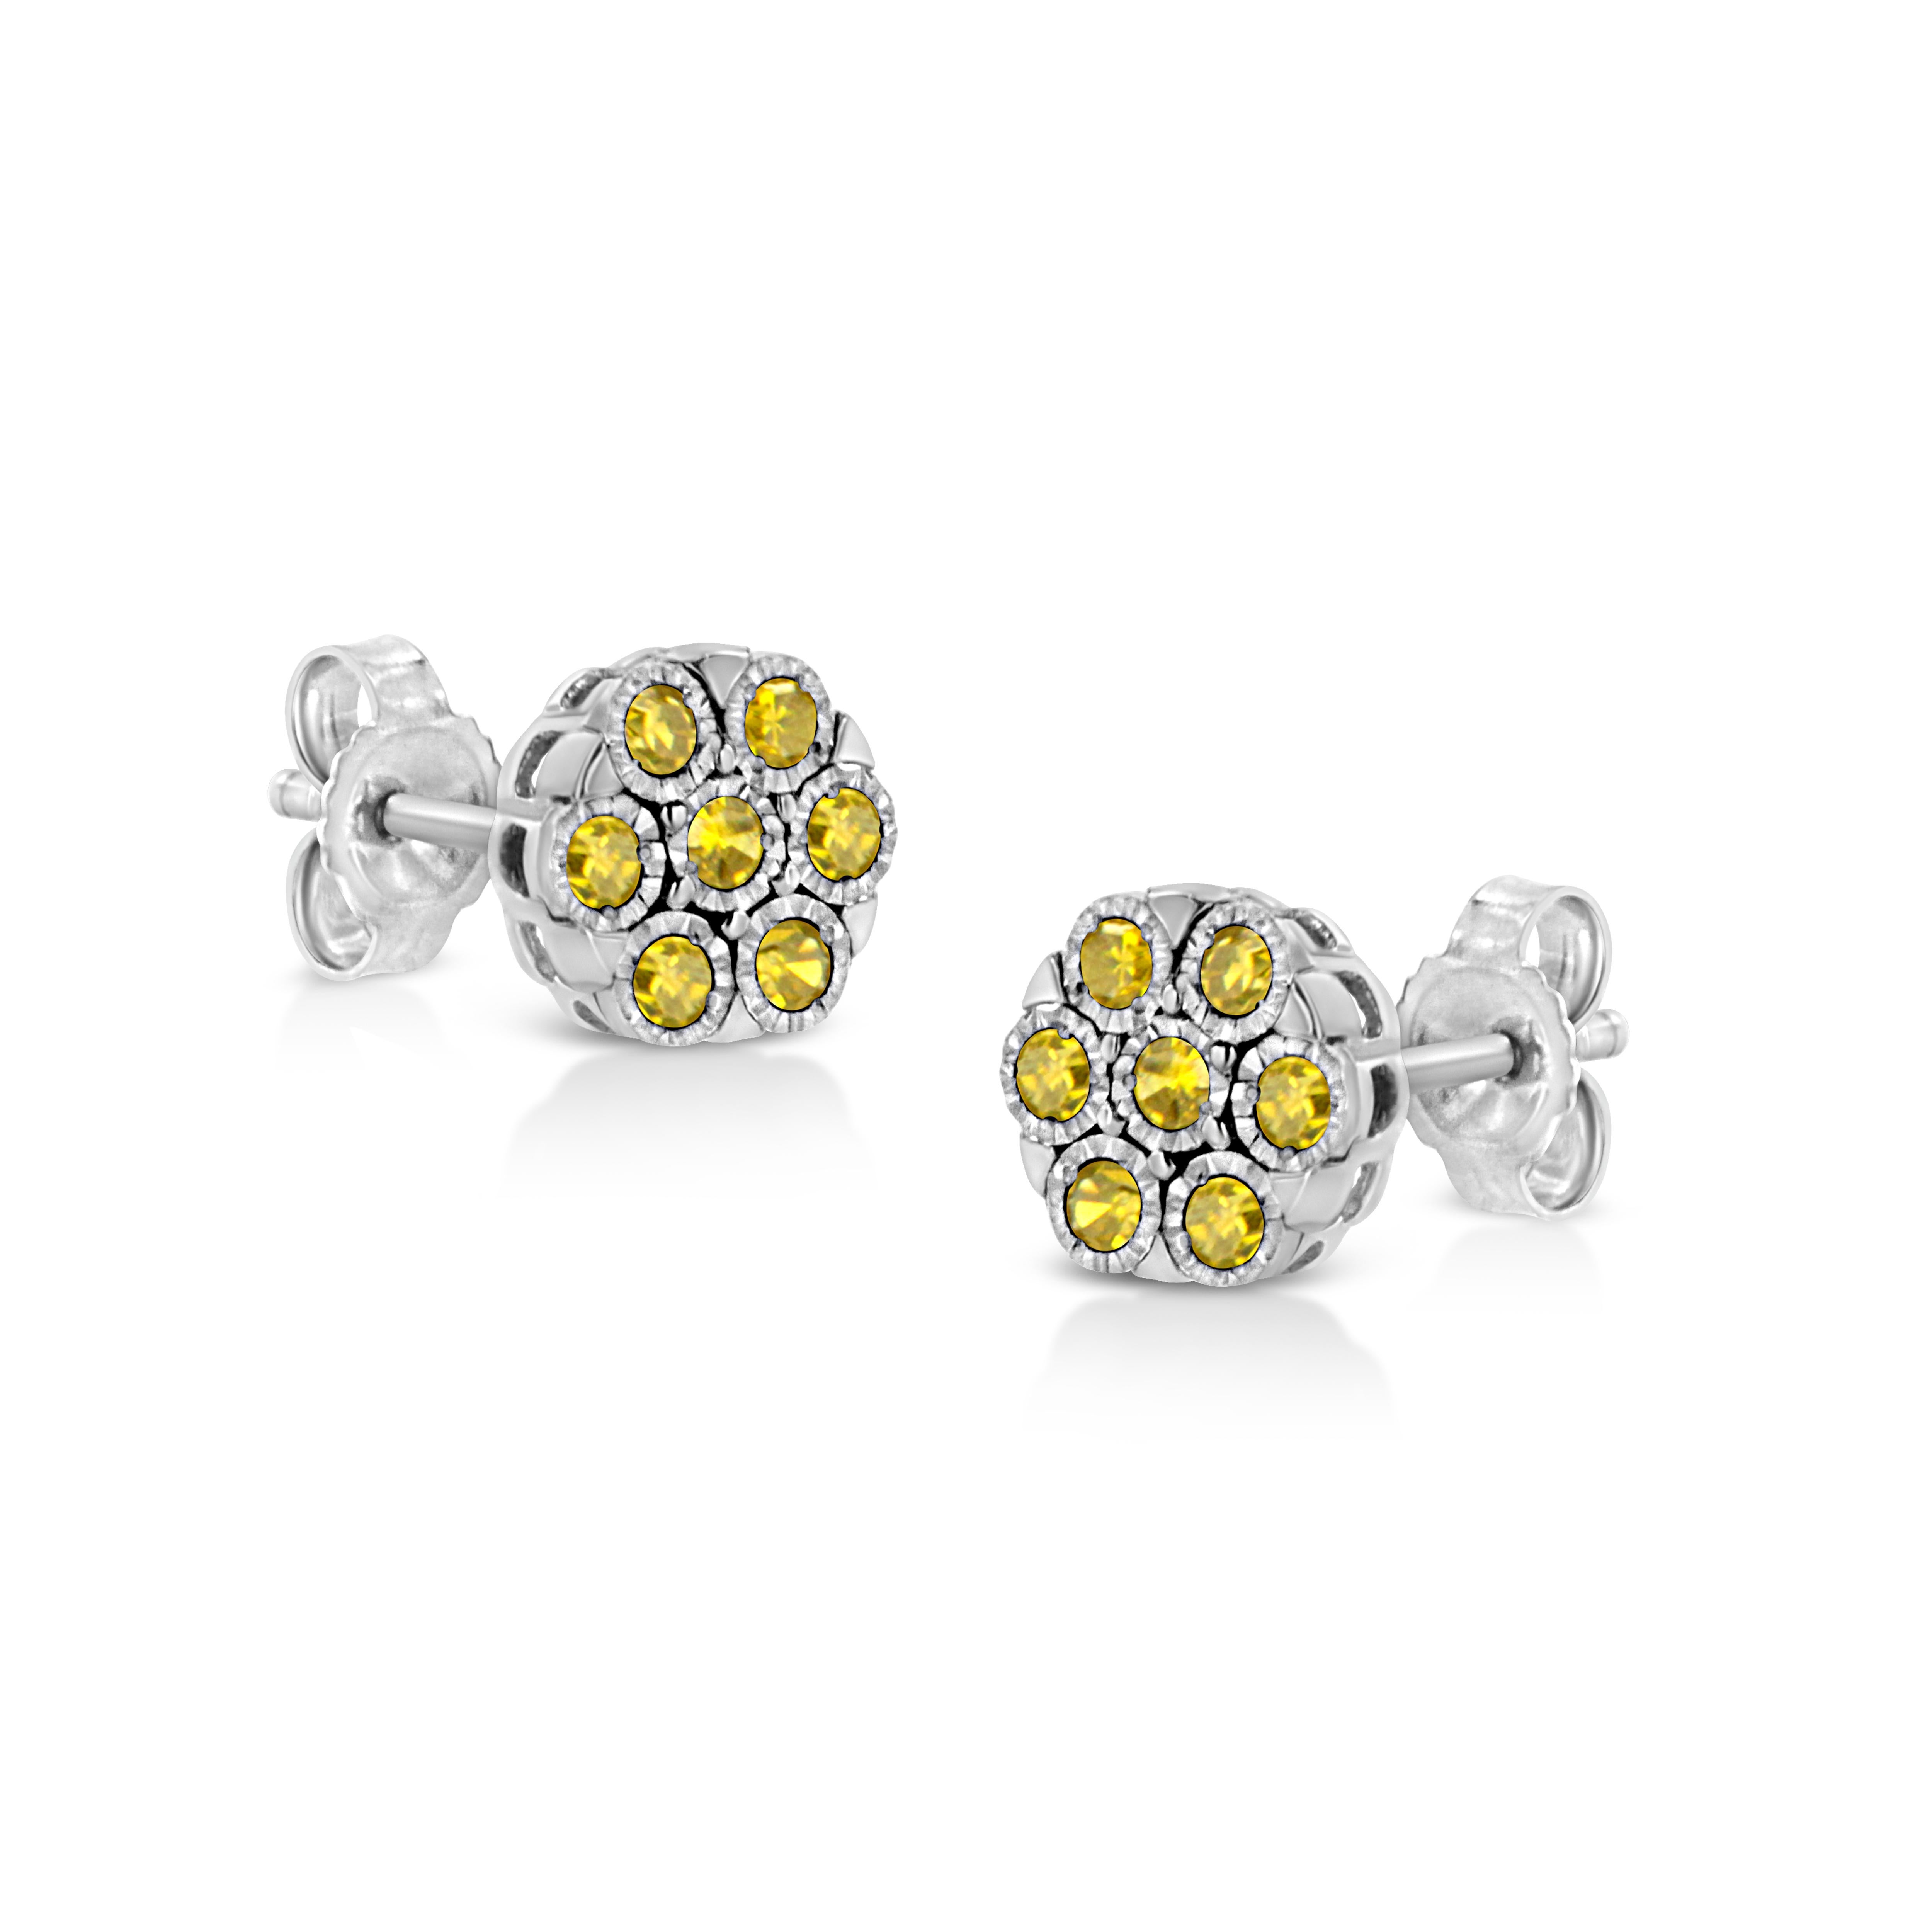 You will fall in love with these classic cluster stud earrings. A must have for any serious jewelry collection, these .925 sterling earrings boast a 0.25 carat total weight of treated yellow diamonds with seven stones each. The earrings are floral